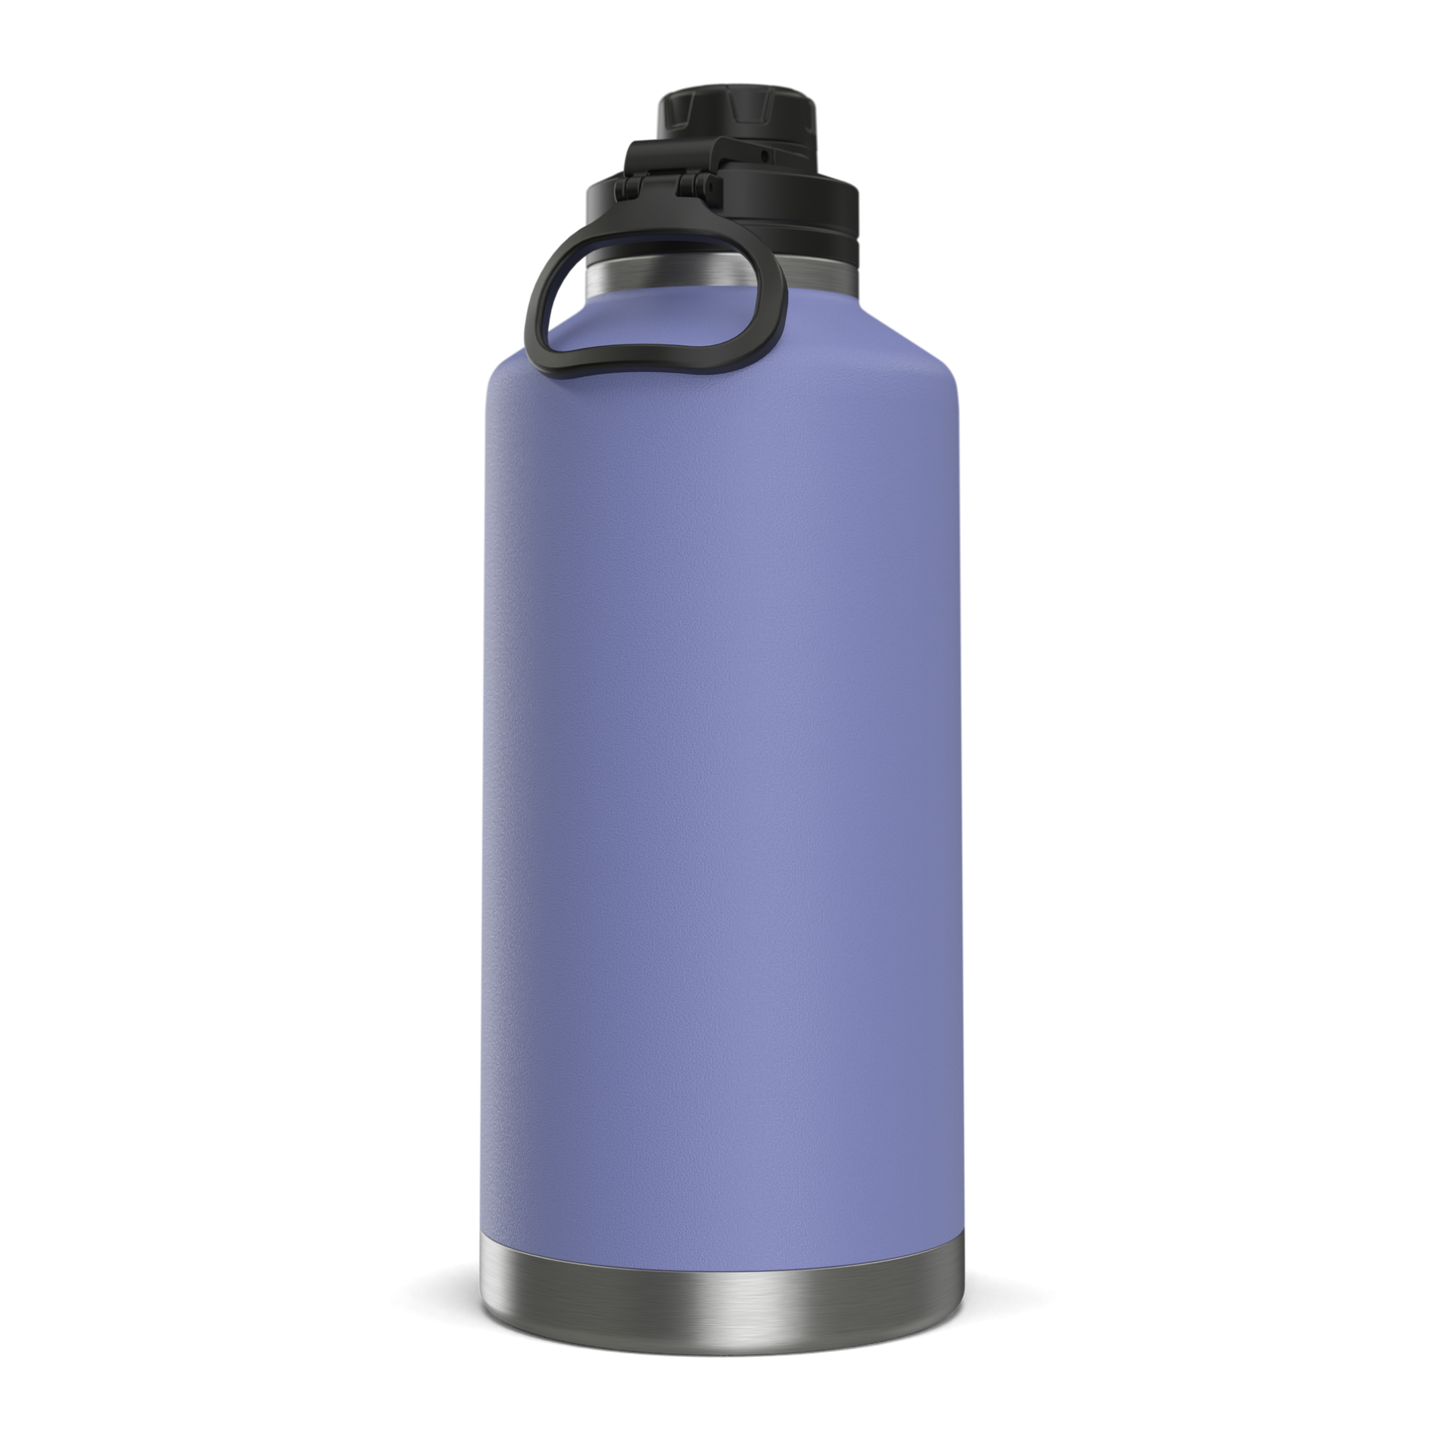 72oz Stainless Steel Insulated Water Bottle With Flexible Chug Lid- Iris